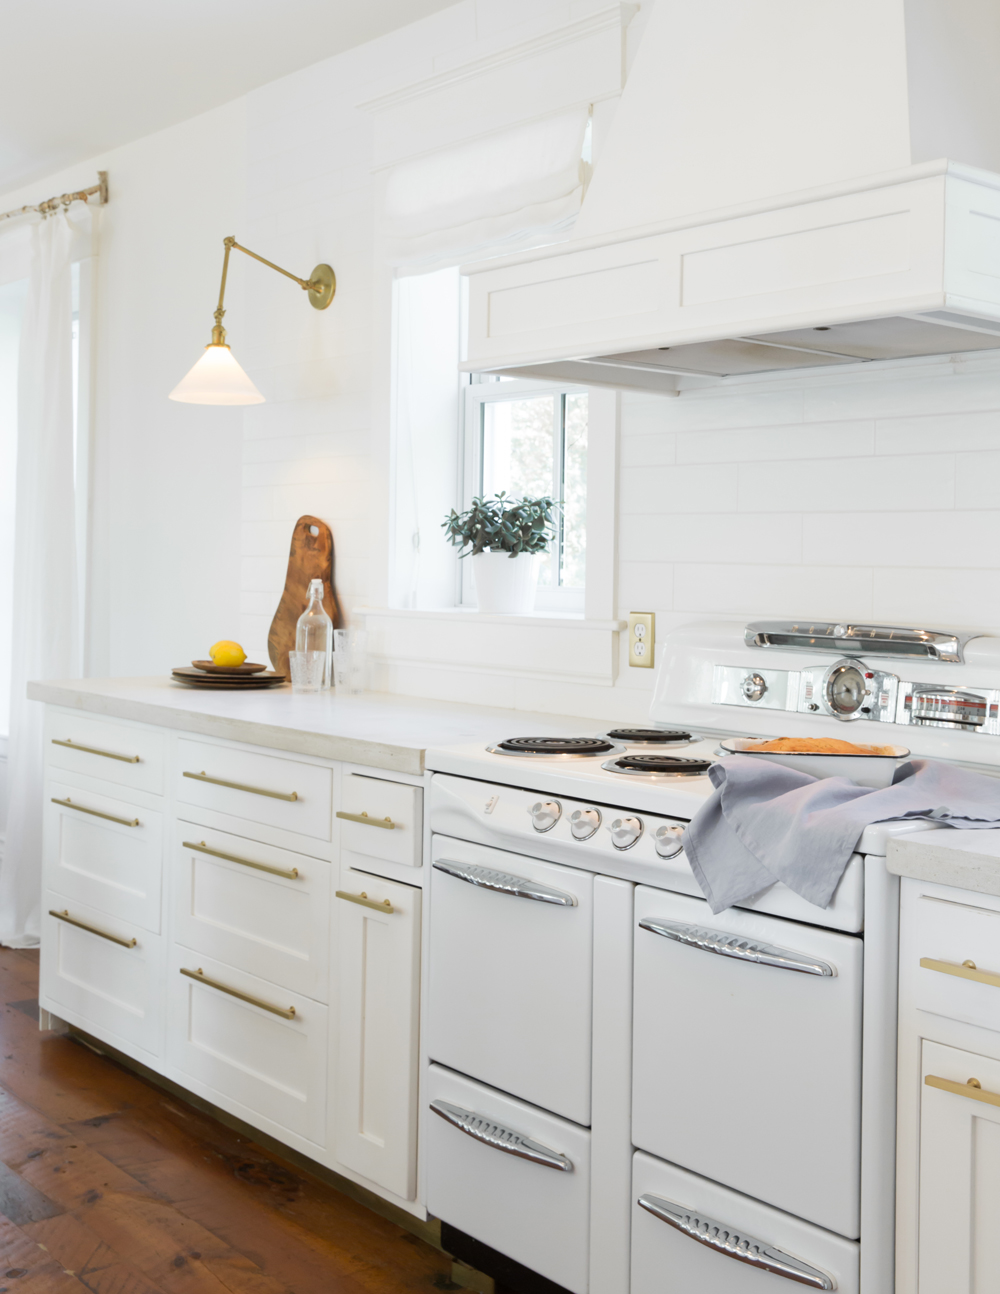 White kitchen cabinets with gold pulls and vintage stove